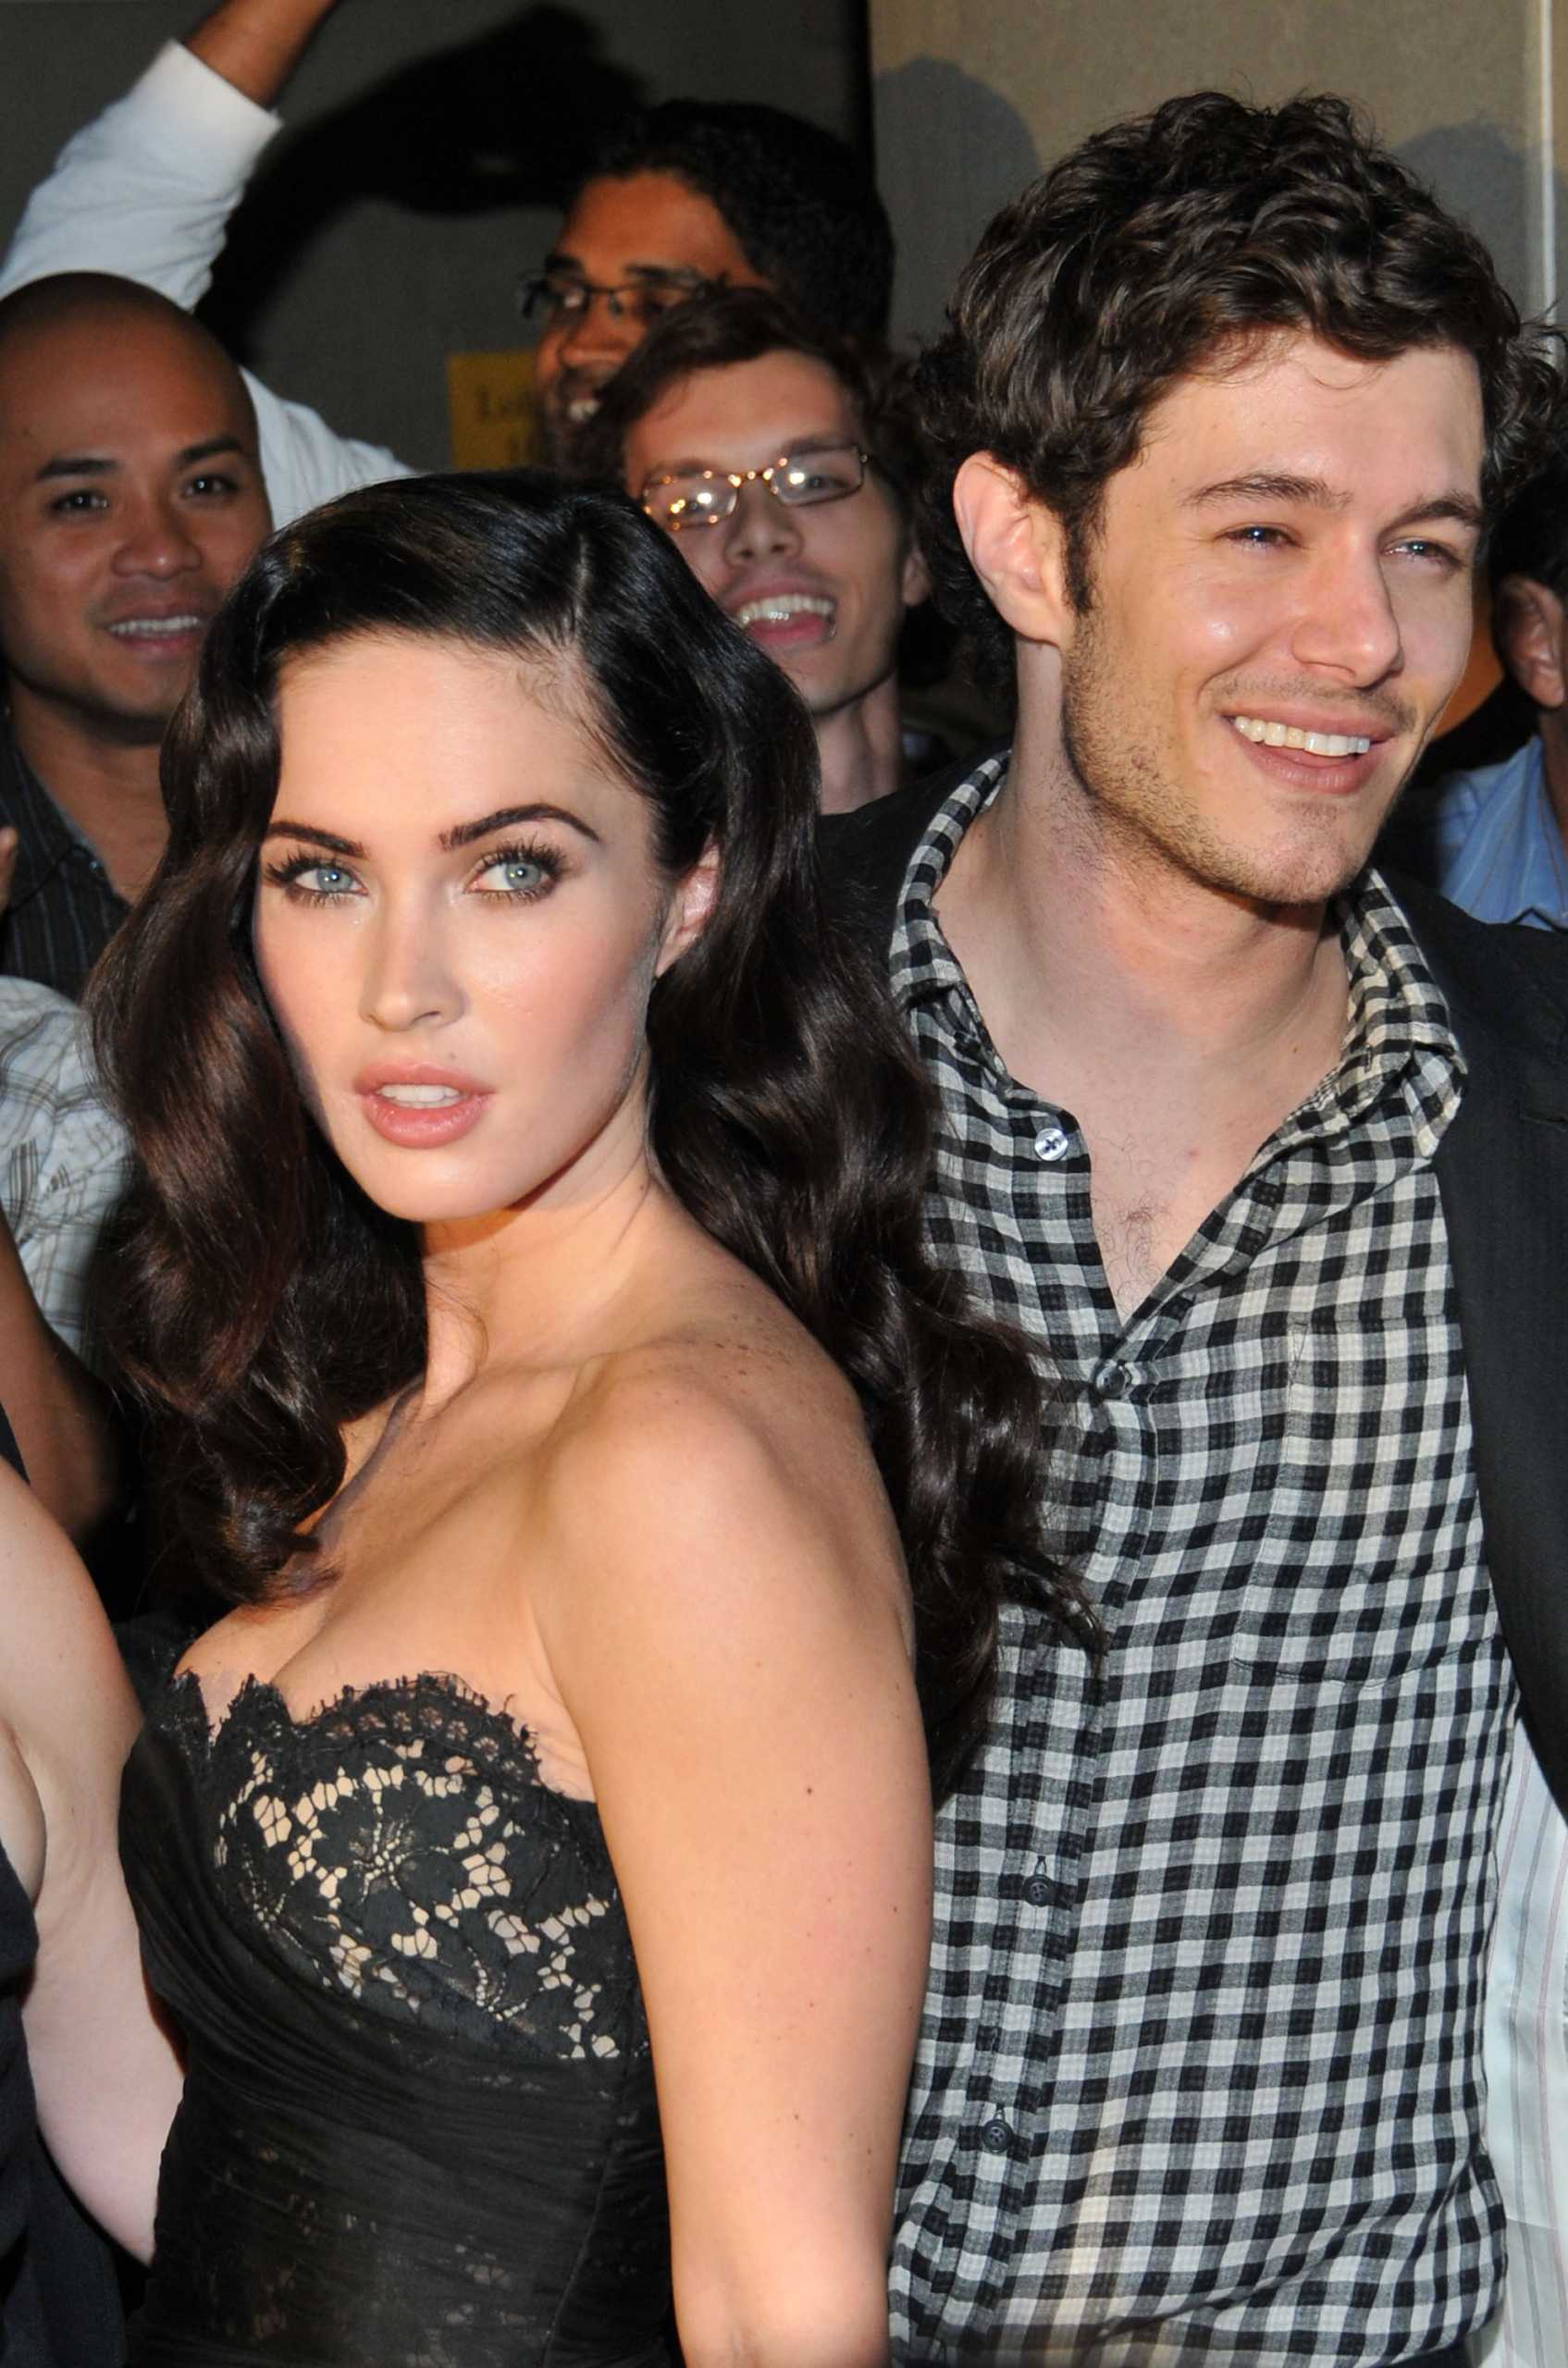 Wasn't they falling for right guy?Adam Brian and Megan Foxx